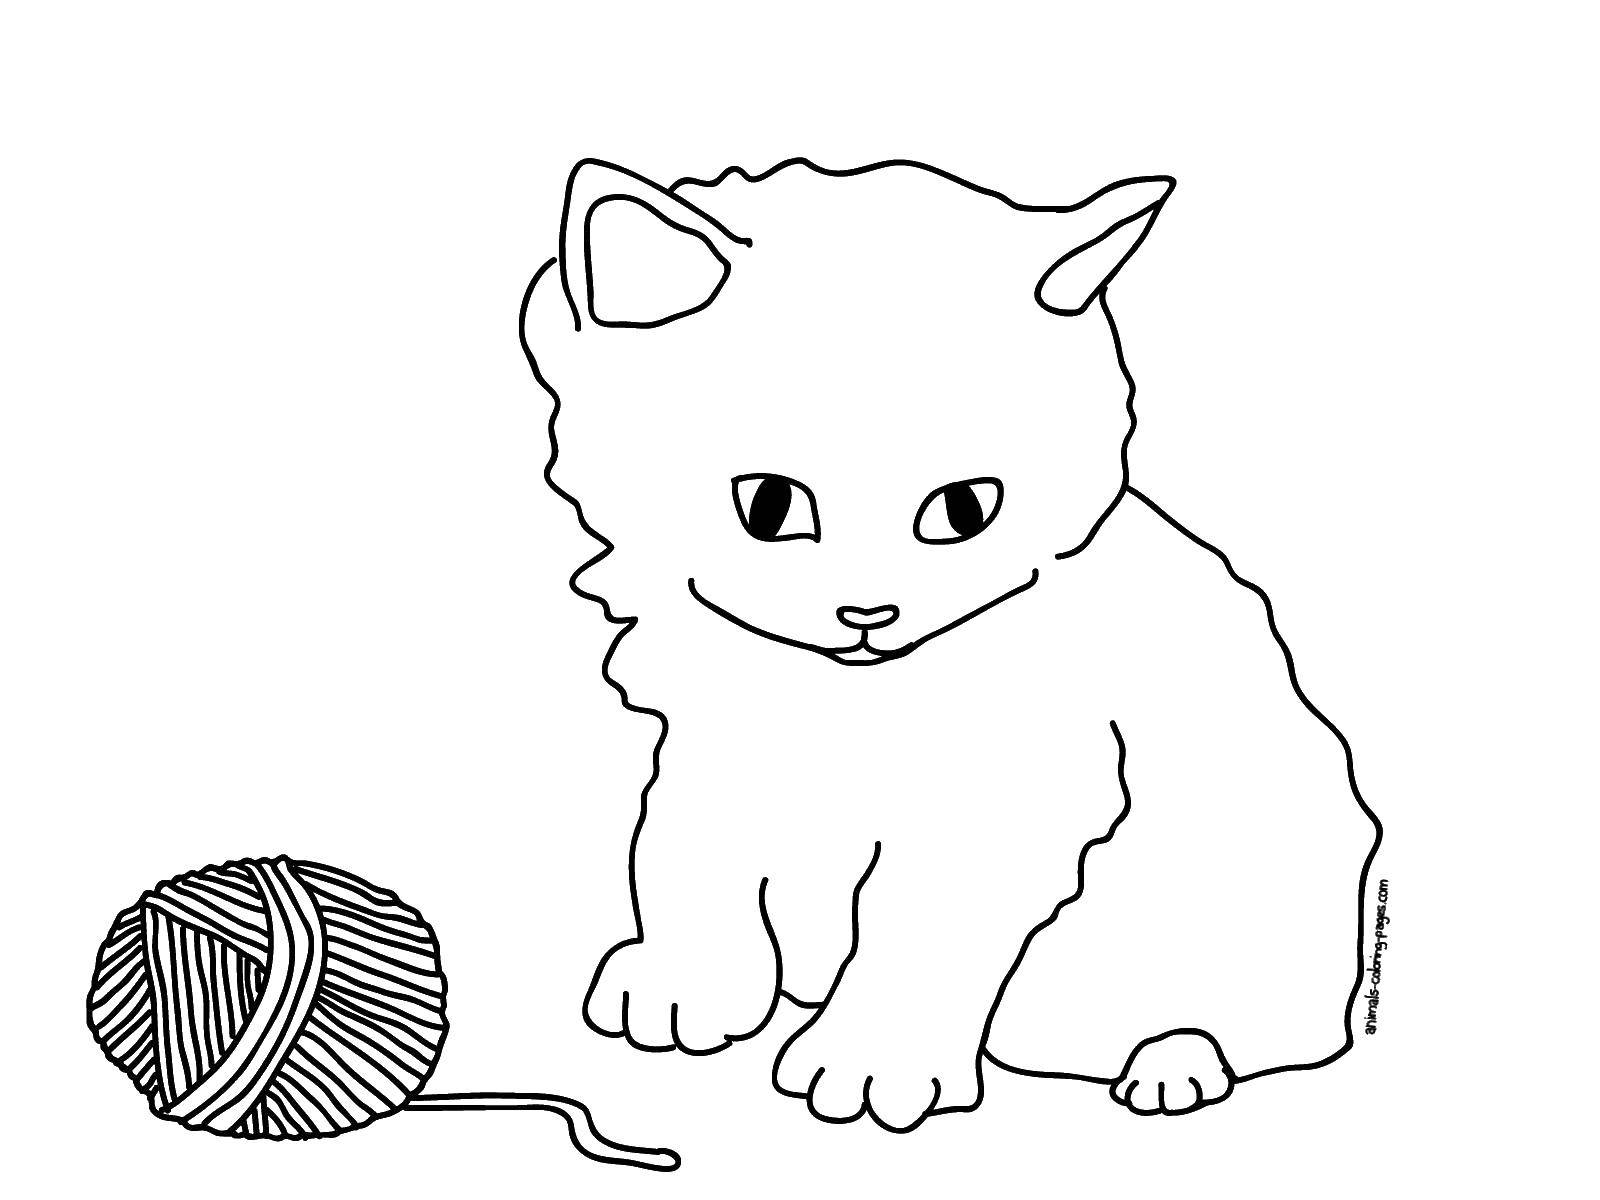 Coloring Kitten with ball. Category Cats and kittens. Tags:  cats, cat, ball.